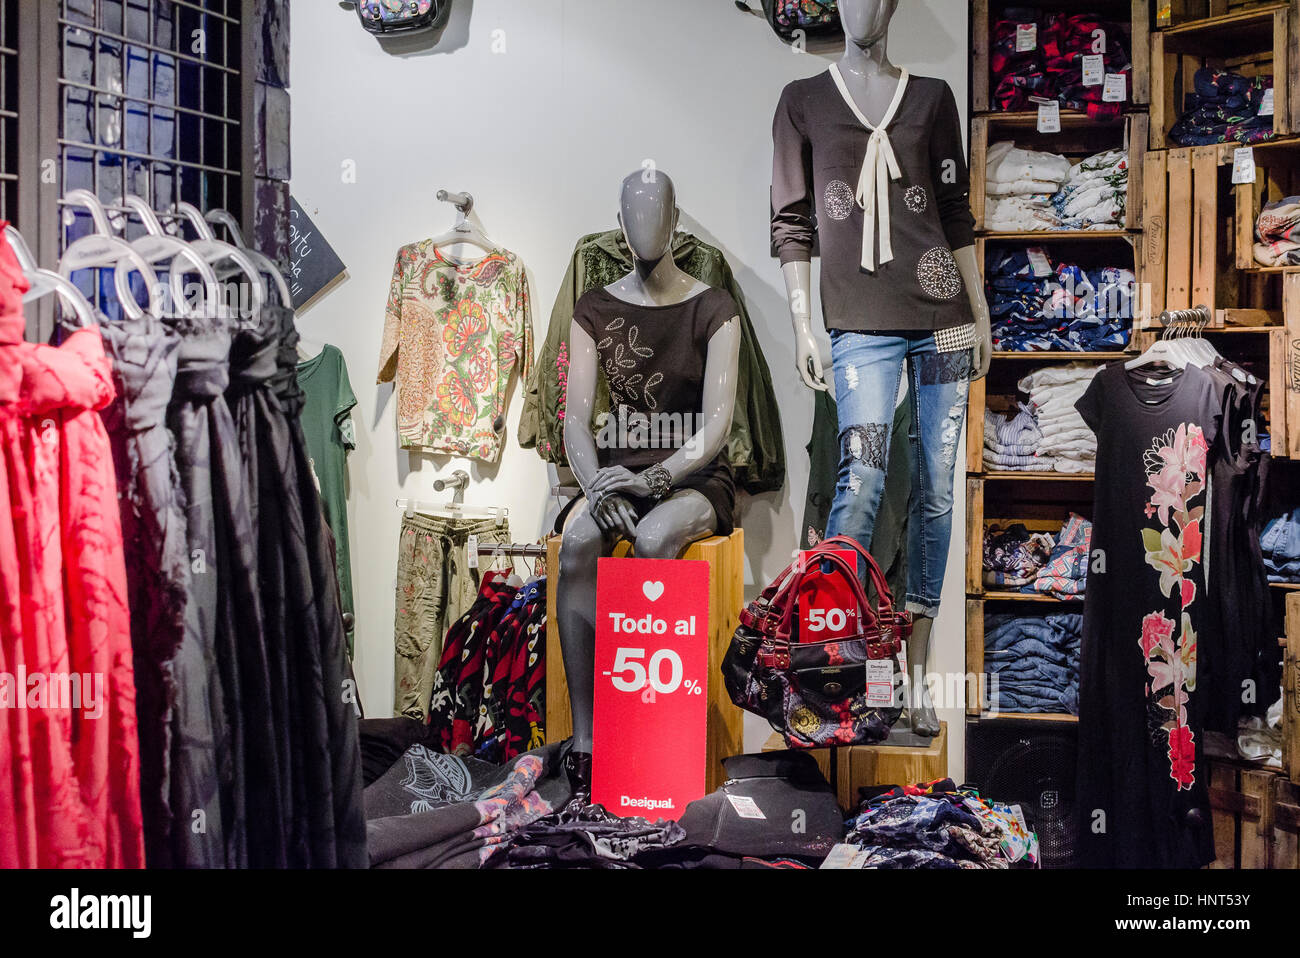 Page 3 - Desigual Store High Resolution Stock Photography and Images - Alamy